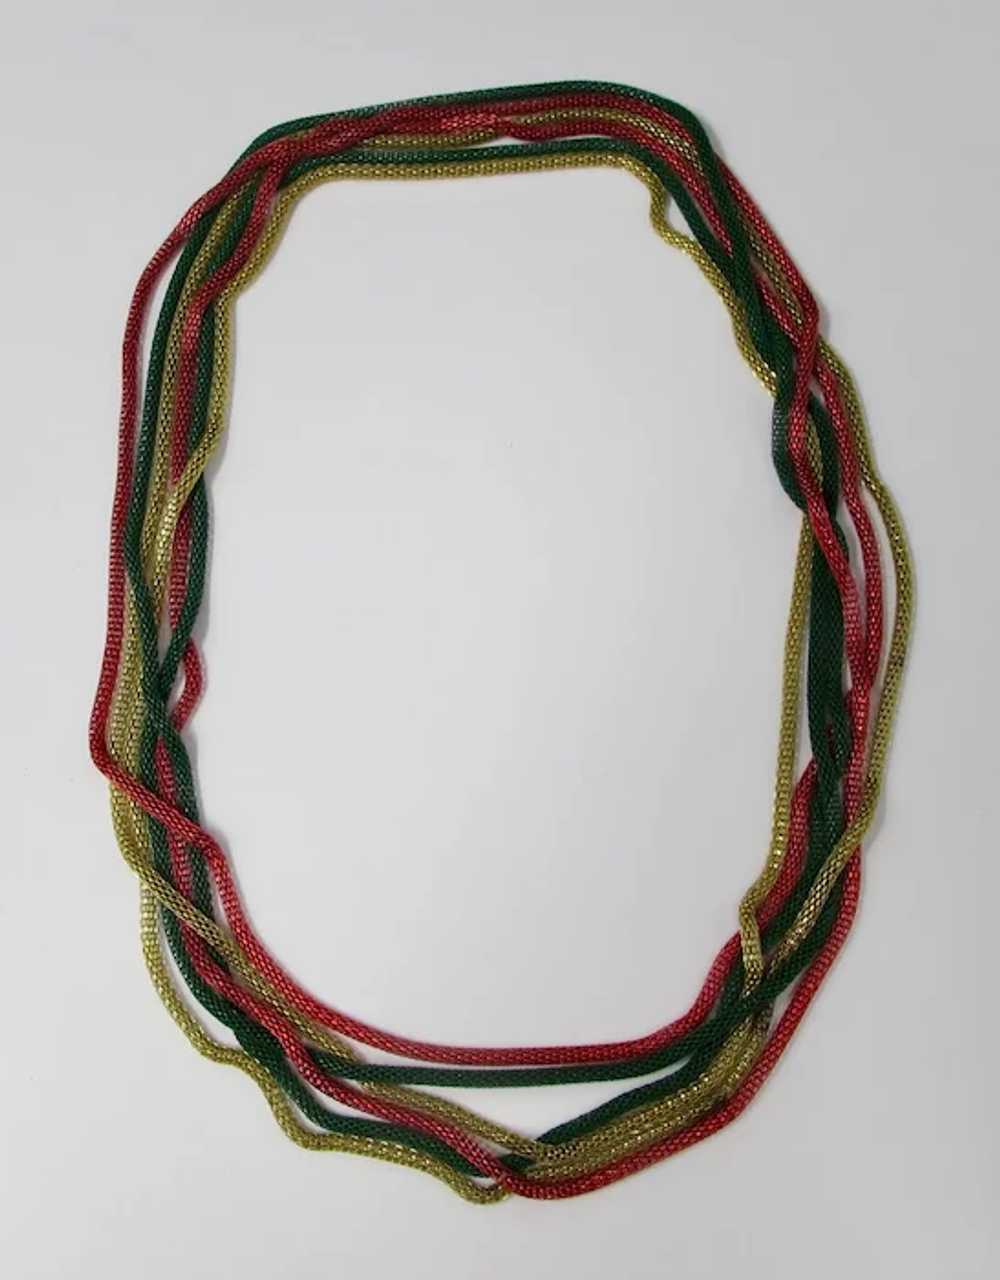 Red, Green, & Gold Mesh Rope Necklaces (Set of 3) - image 2